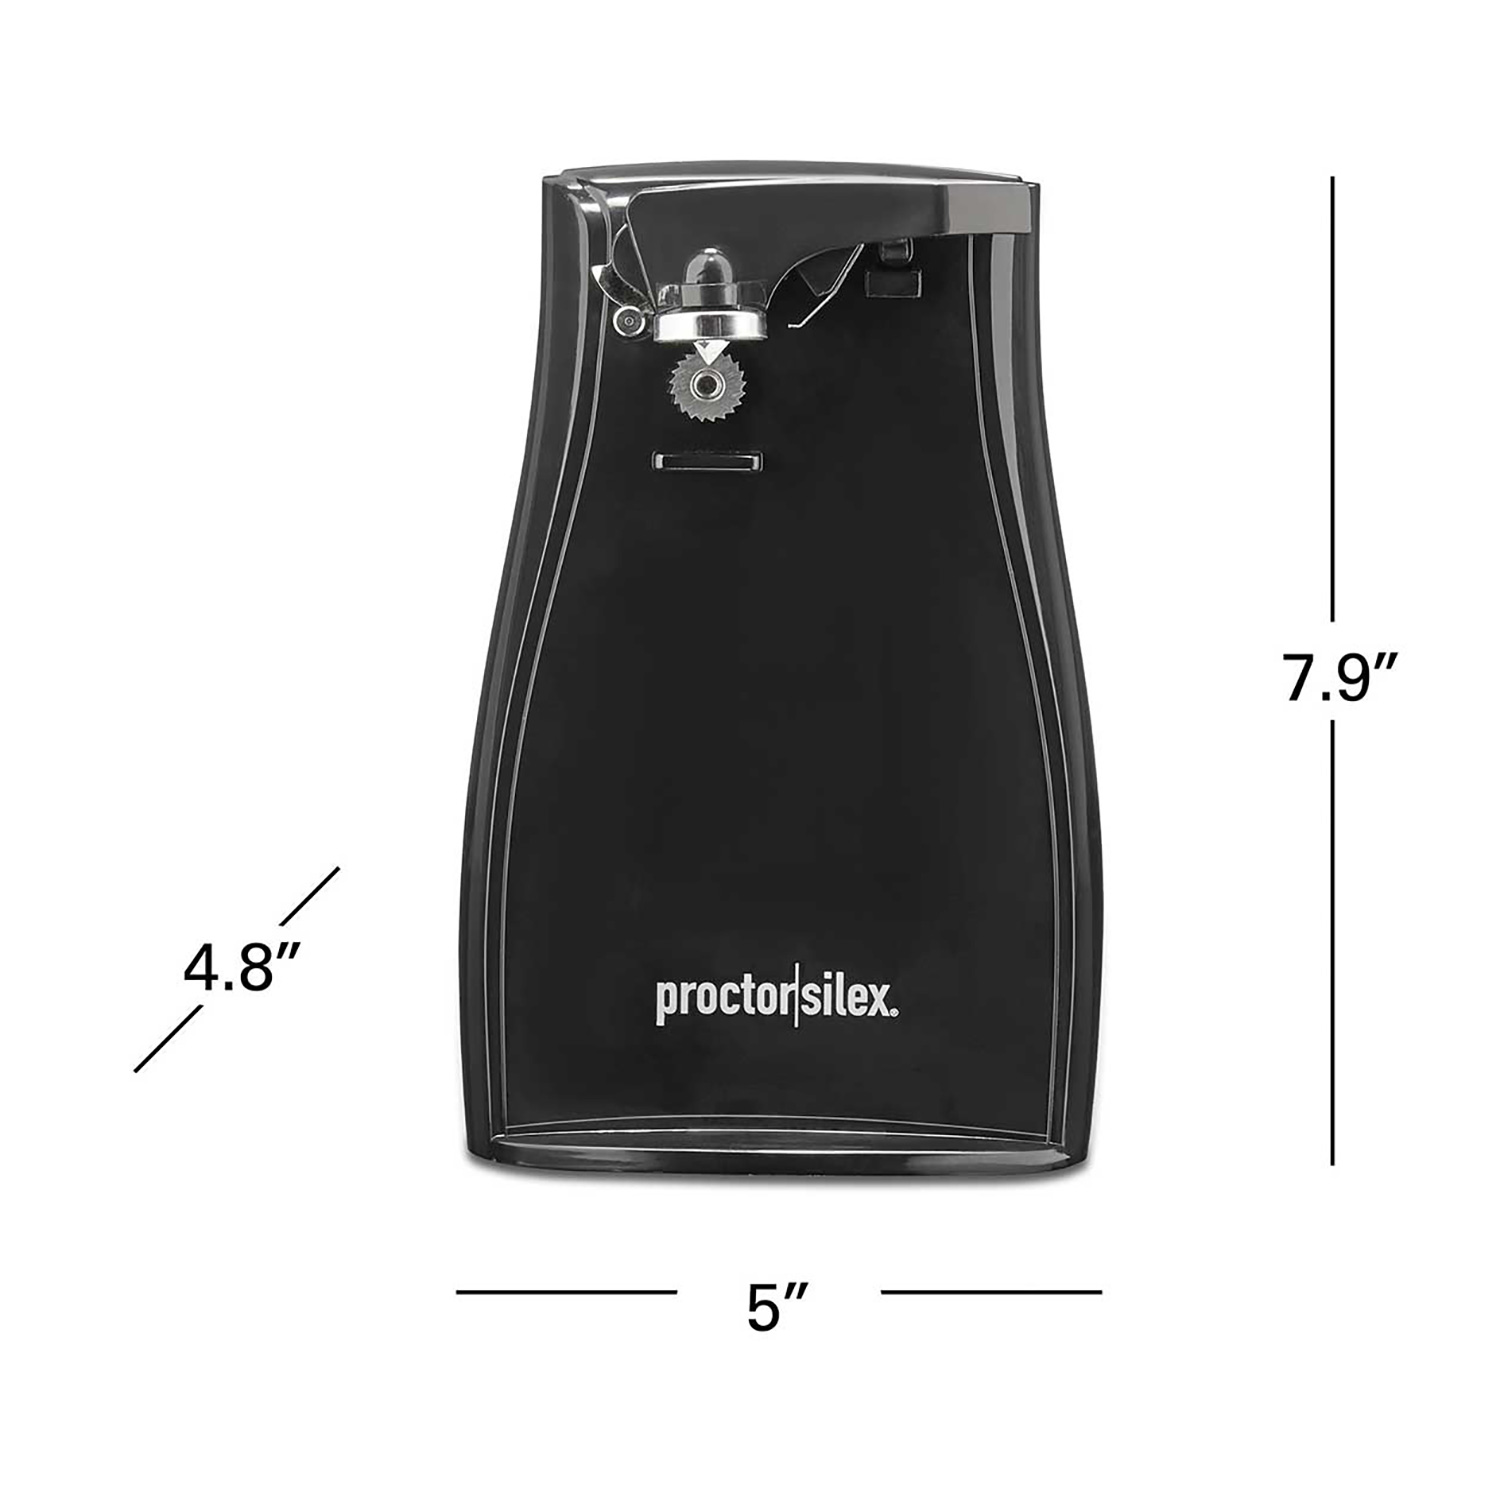 Proctor Silex 75217 Electric Can Opener - Black